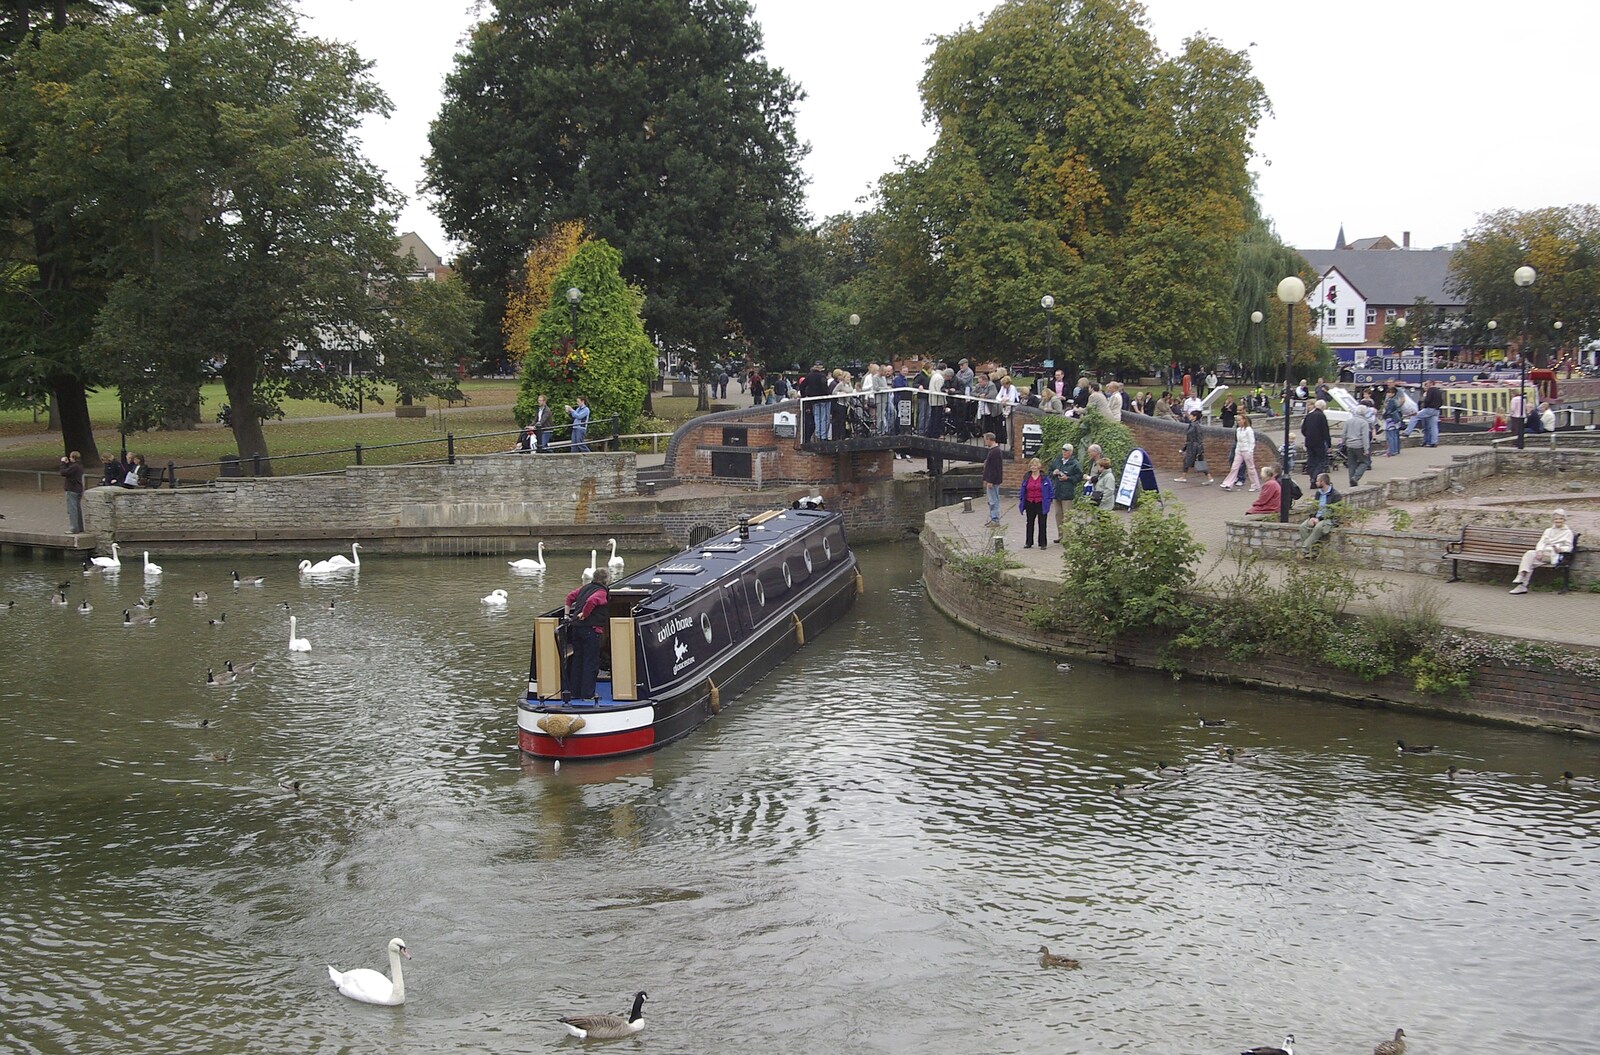 Matt's Wedding Reception, and a BSCC Presentation, Brome, Solihull and Stratford upon Avon - 6th October 2007: Another longboat goes through the lock